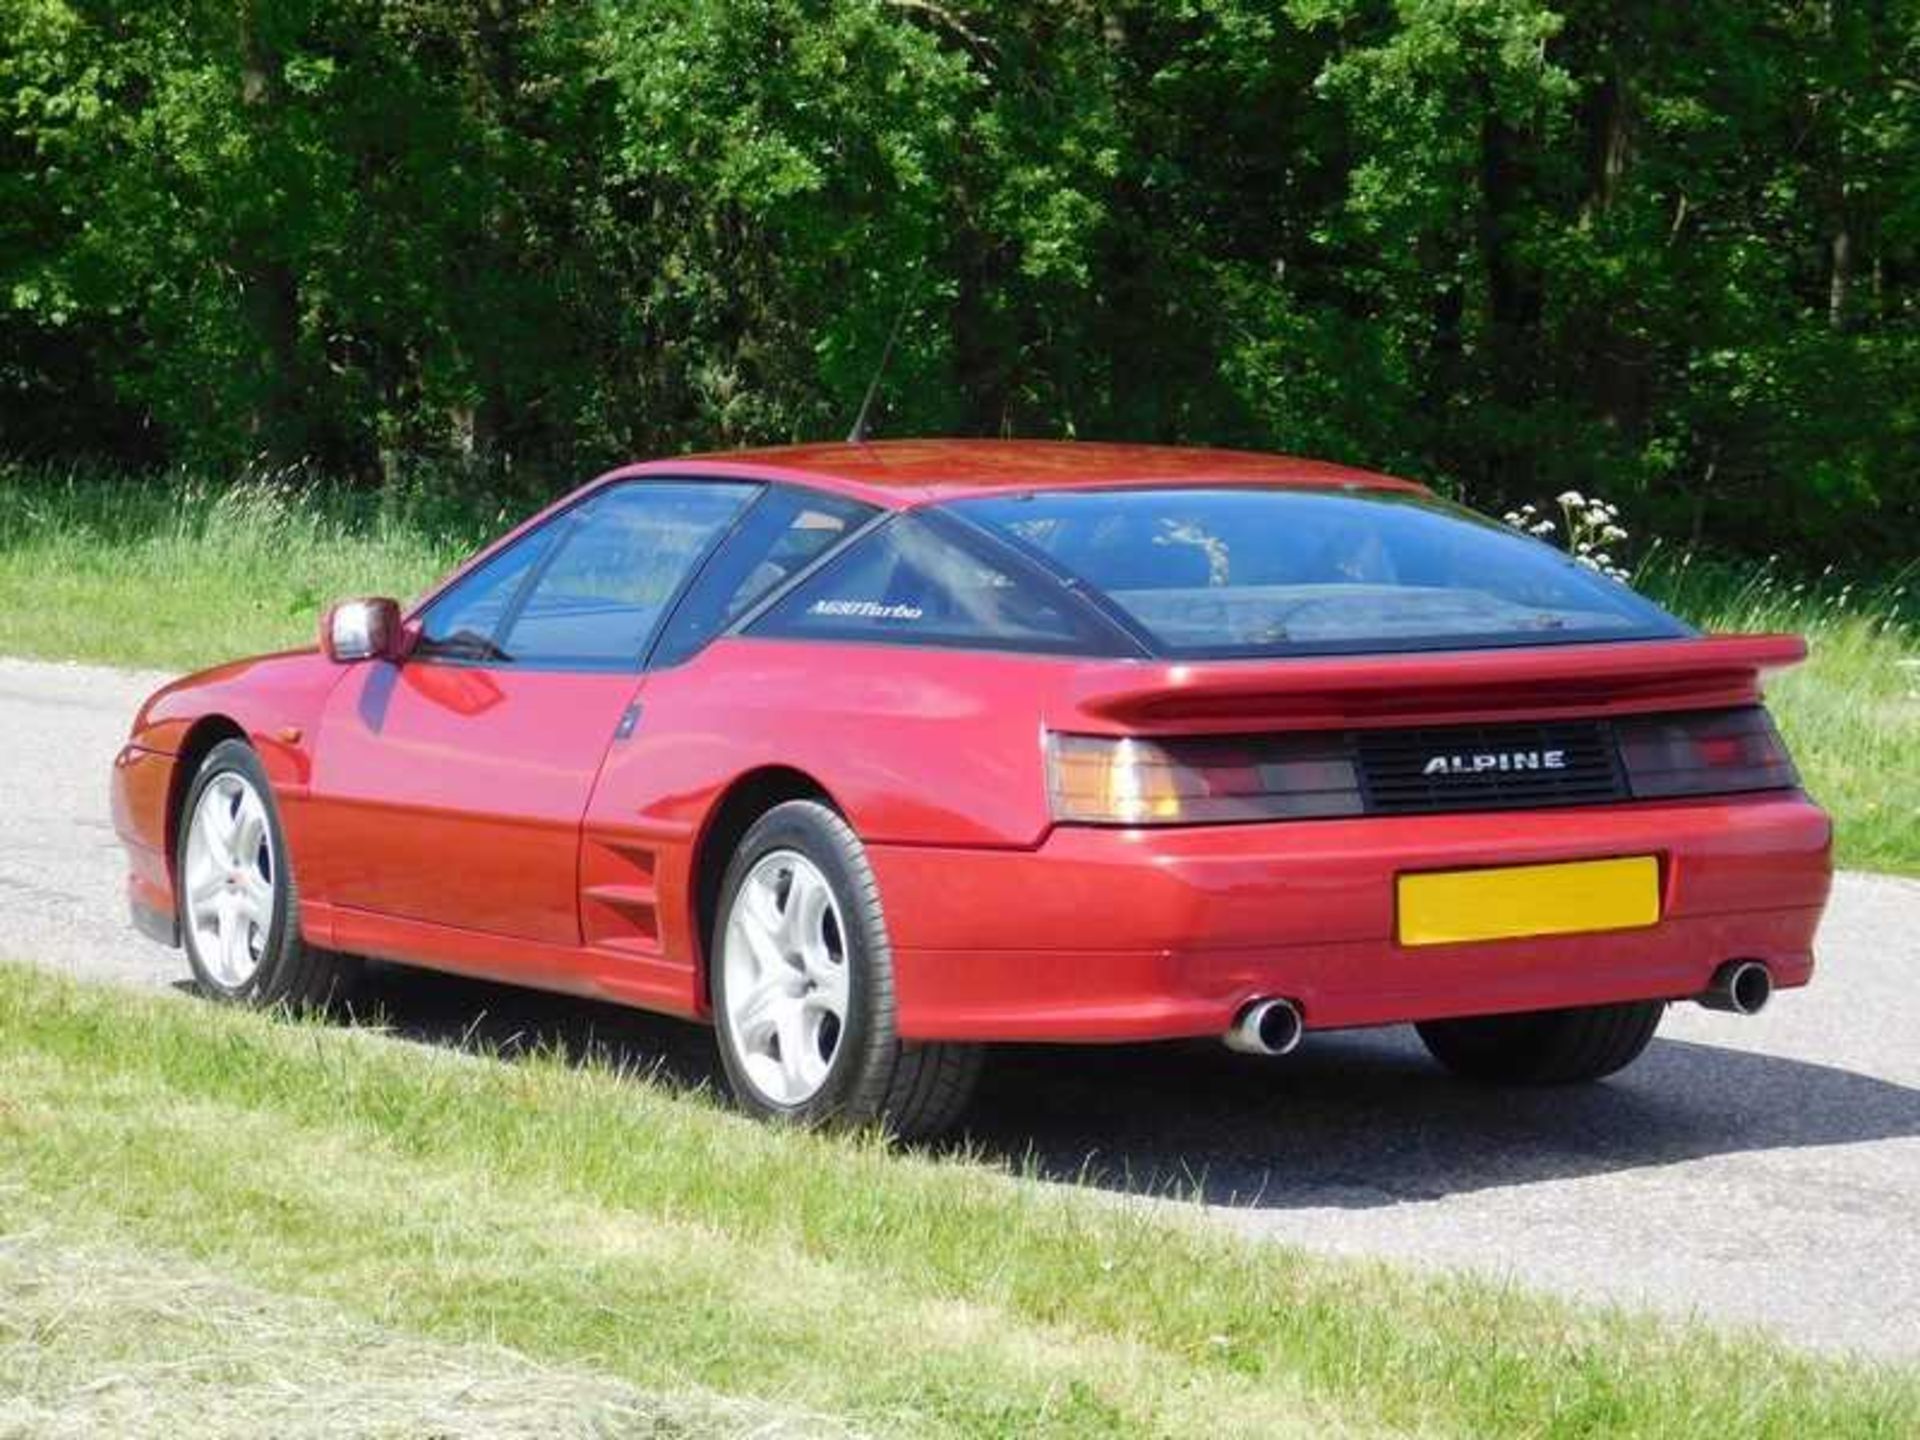 1995 Renault Alpine A610 Turbo One of just 68, right-hand-drive, UK-market Alpine A610s - Image 12 of 70